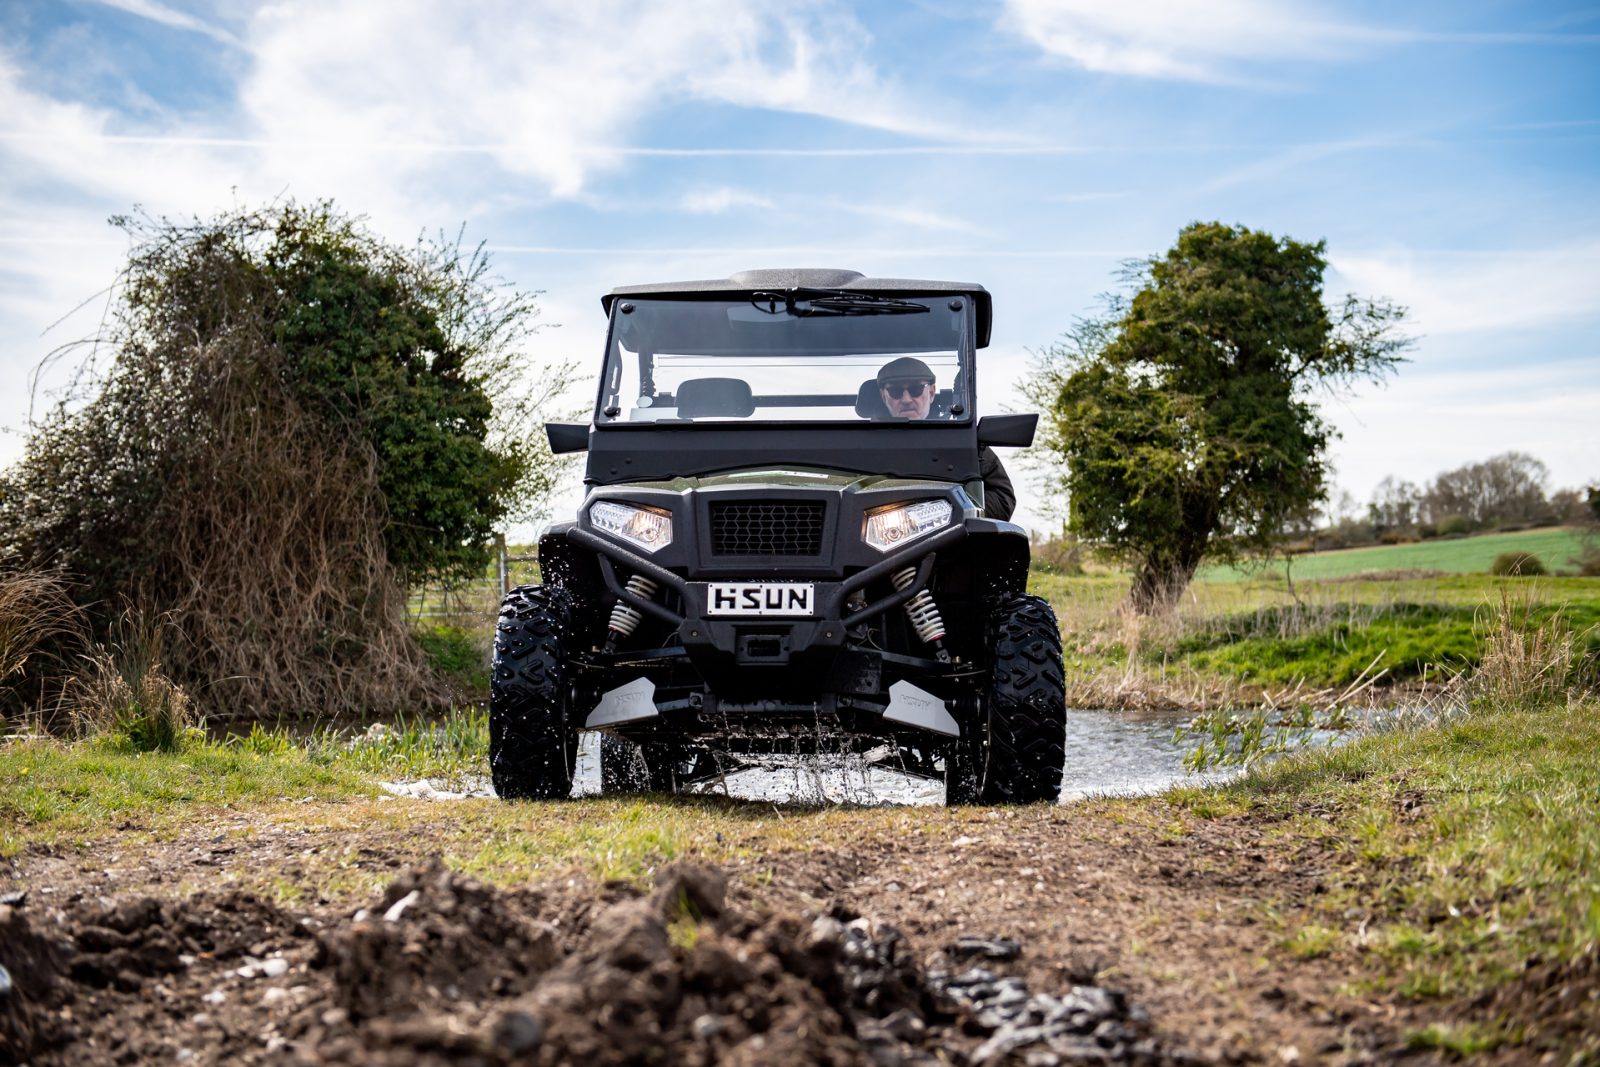 The HiSun Sector 5kW 4×4 electric HiSun buggy from low level water to muddy tracks